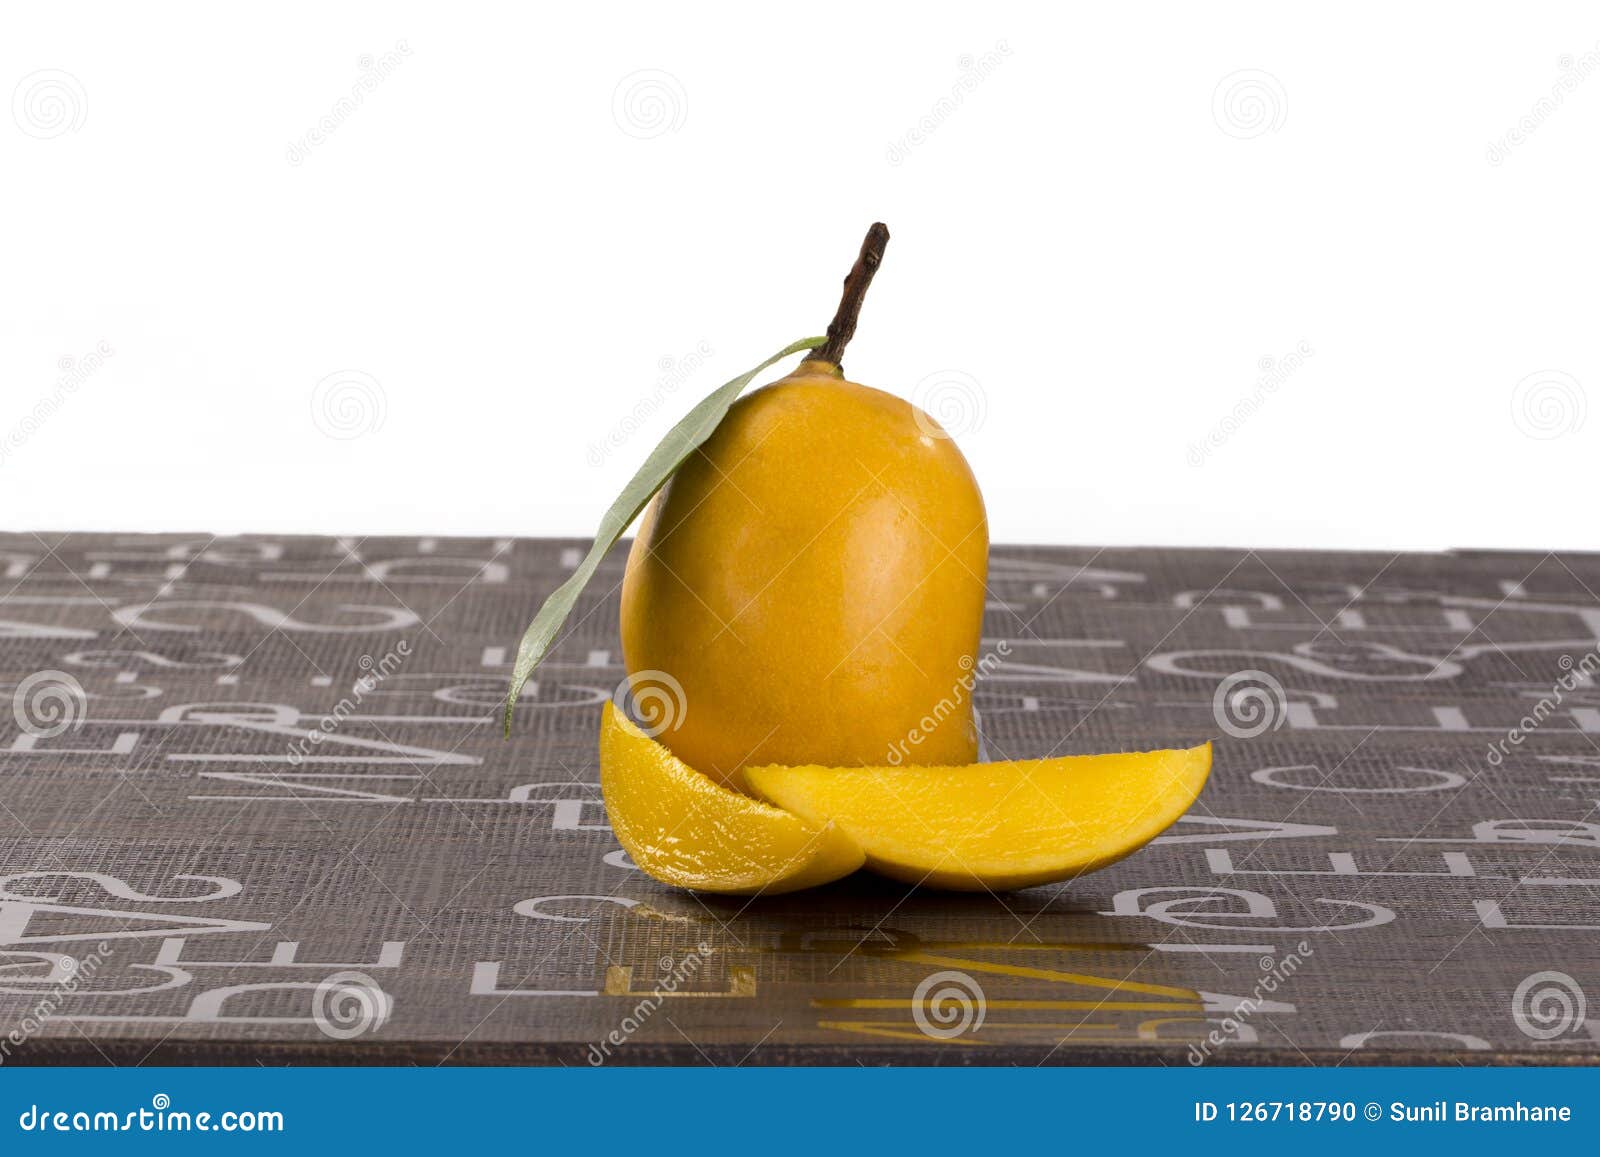 Mango with Some Cut Slices on Brown Background Stock Photo - Image of ...